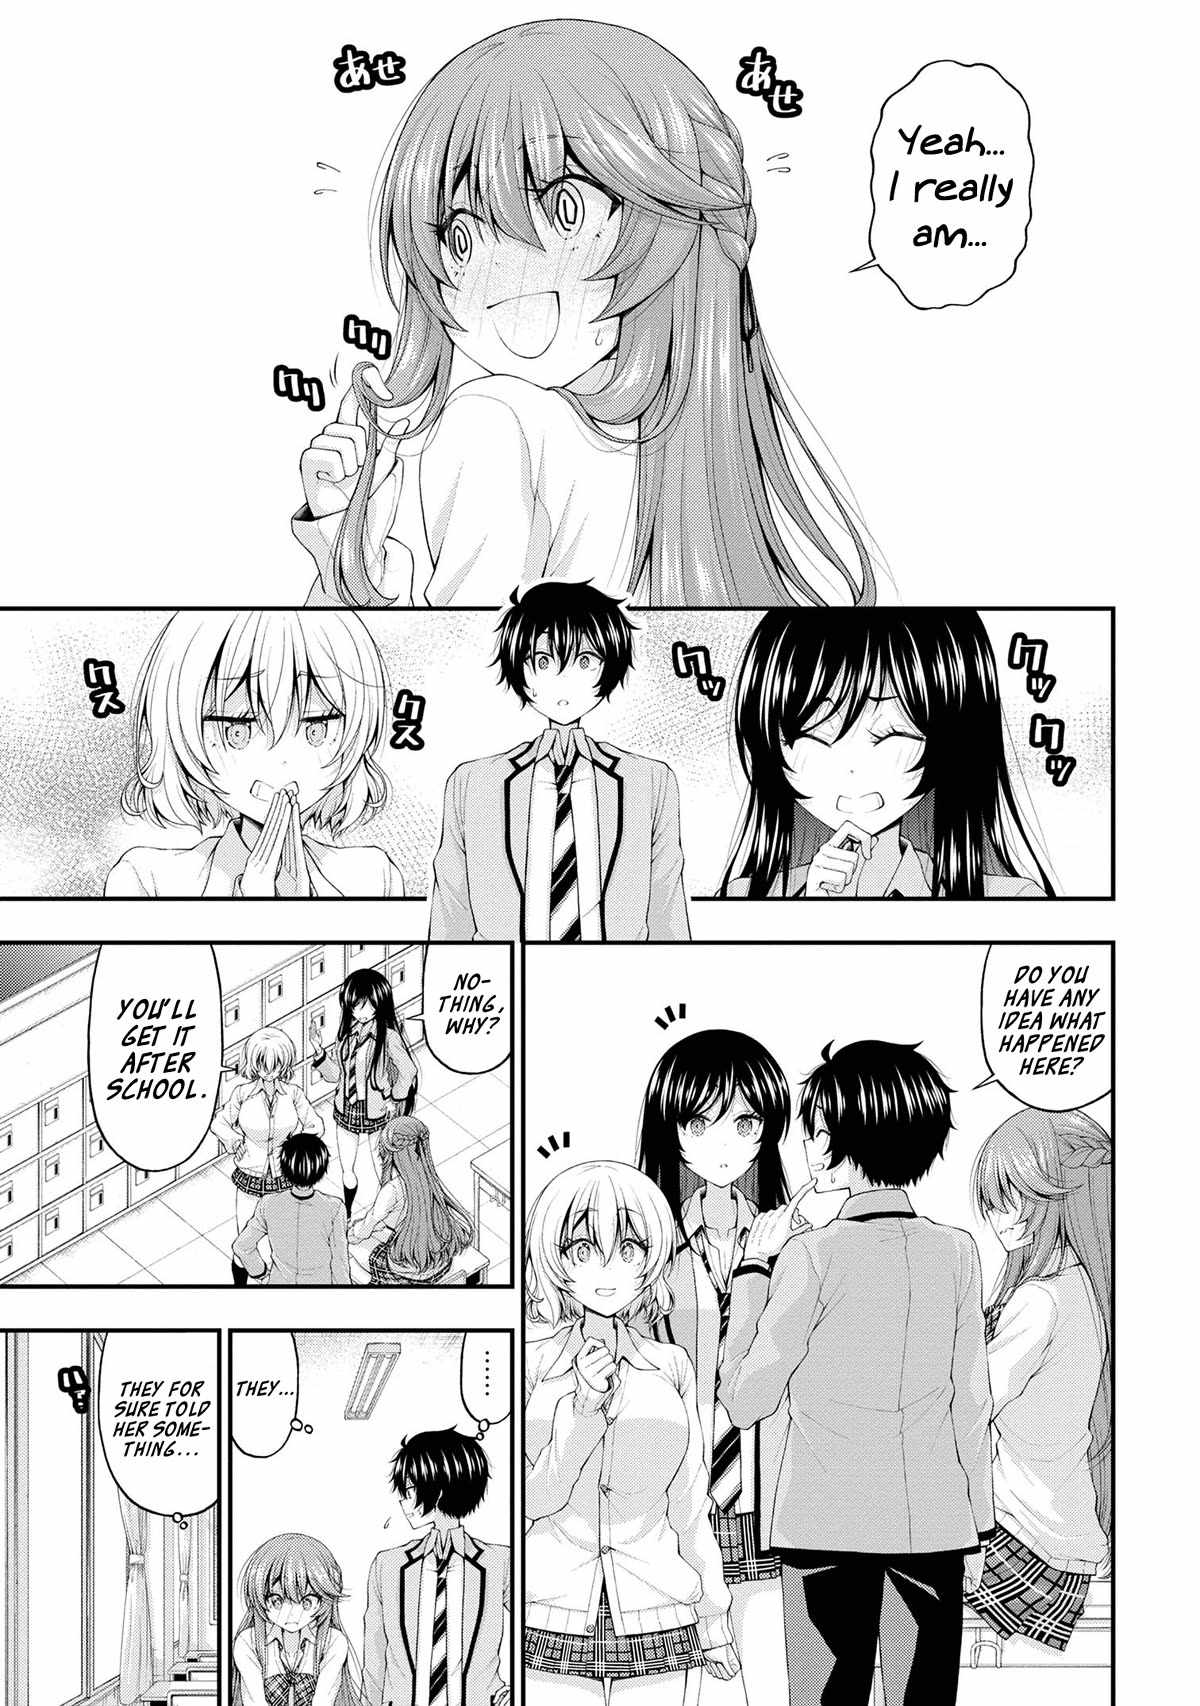 The Gal Who Was Meant to Confess to Me as a Game Punishment Has Apparently Fallen in Love with Me Chapter 13-eng-li - Page 24